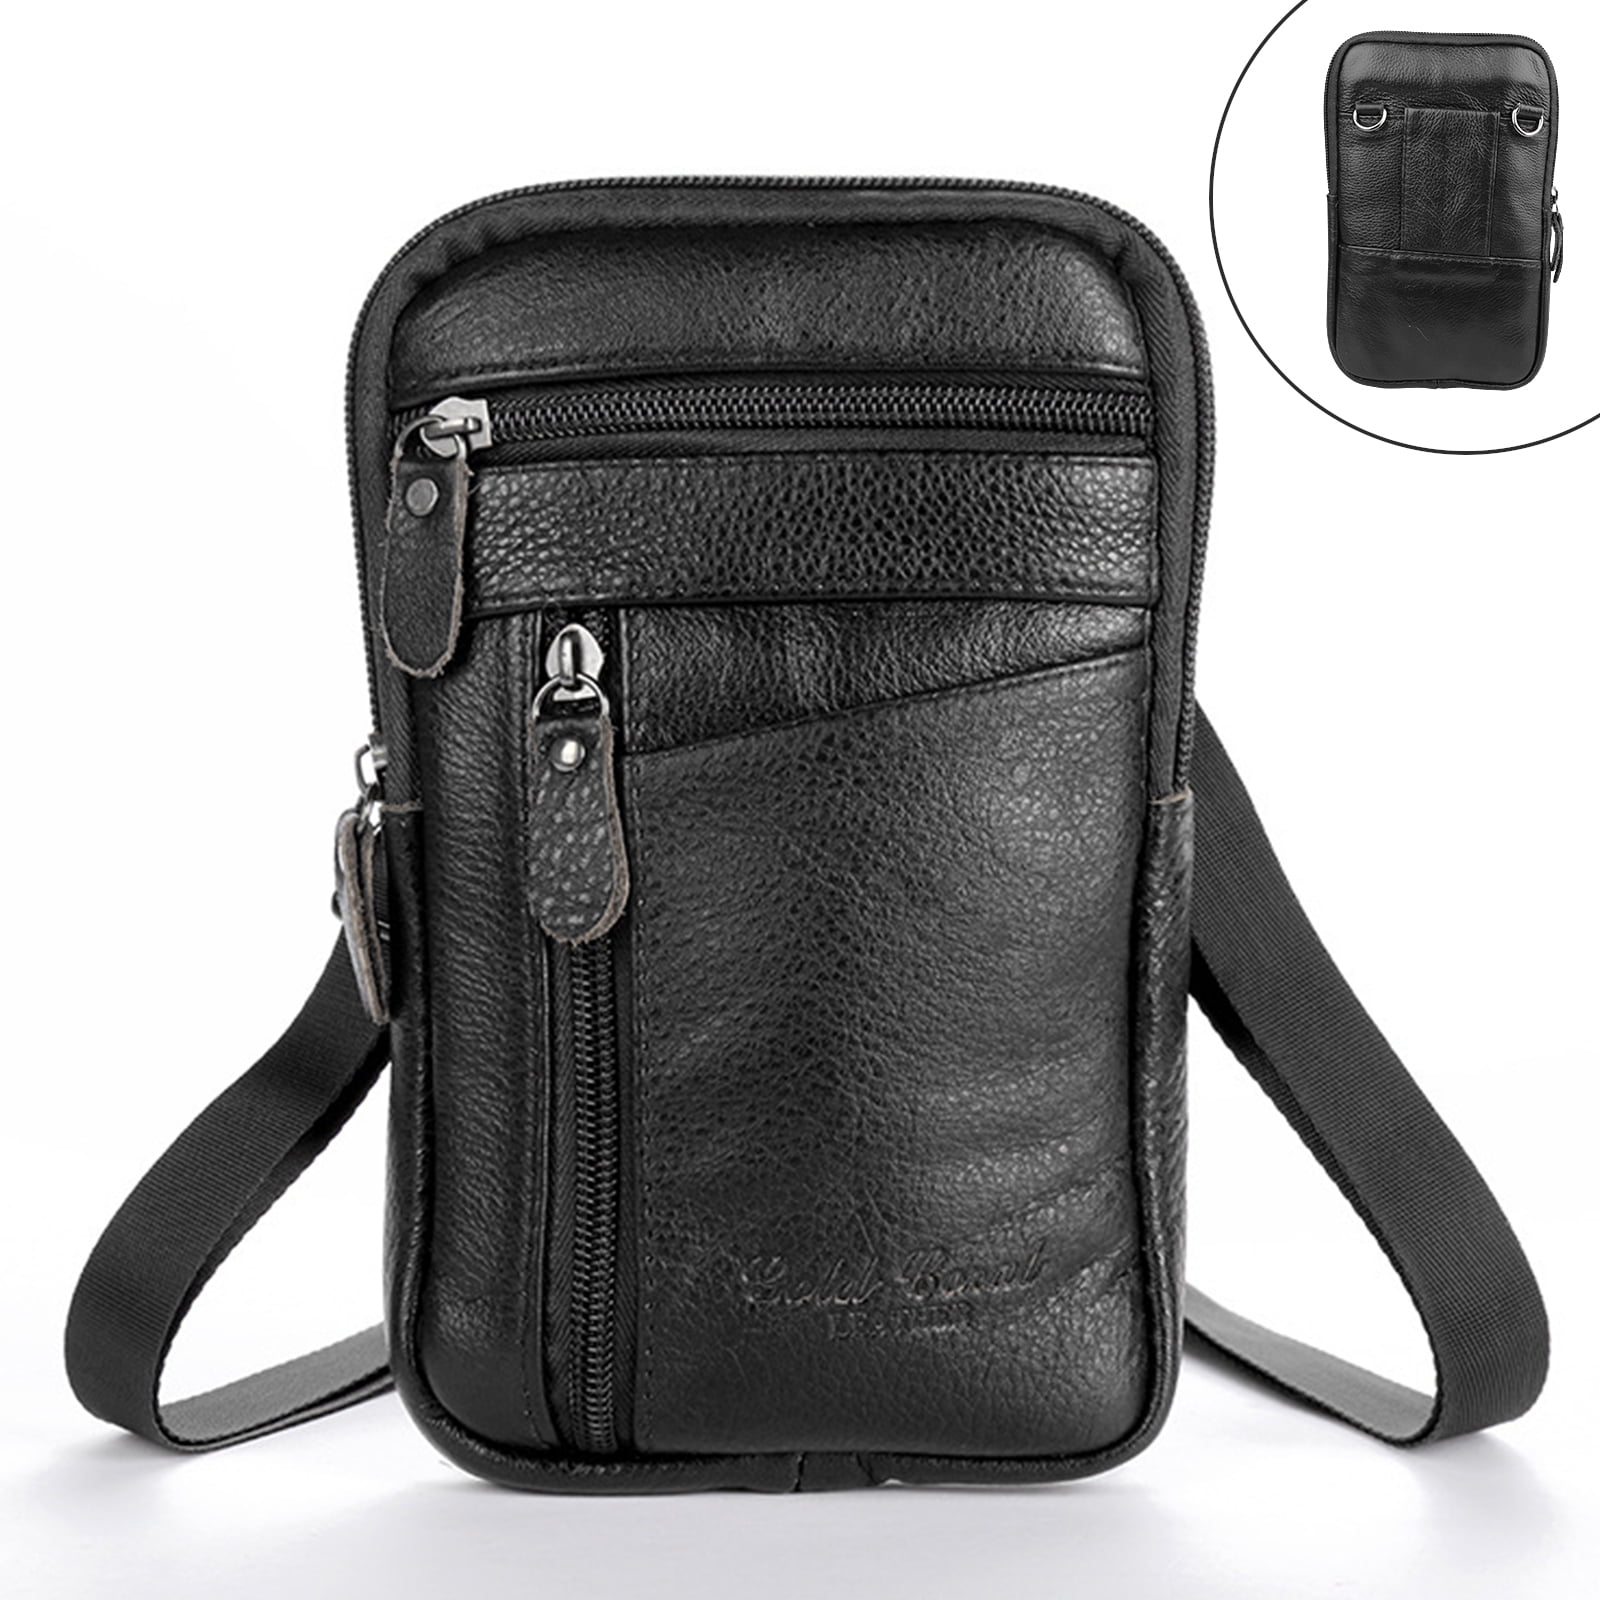 Leather Crossbody IPhone Case With Card Holder Fits IPhone 11/12/13/14 Pro  Max Mini, Coin Purse Shoulder Bag Design, Black From Case00301, $9.54 |  DHgate.Com